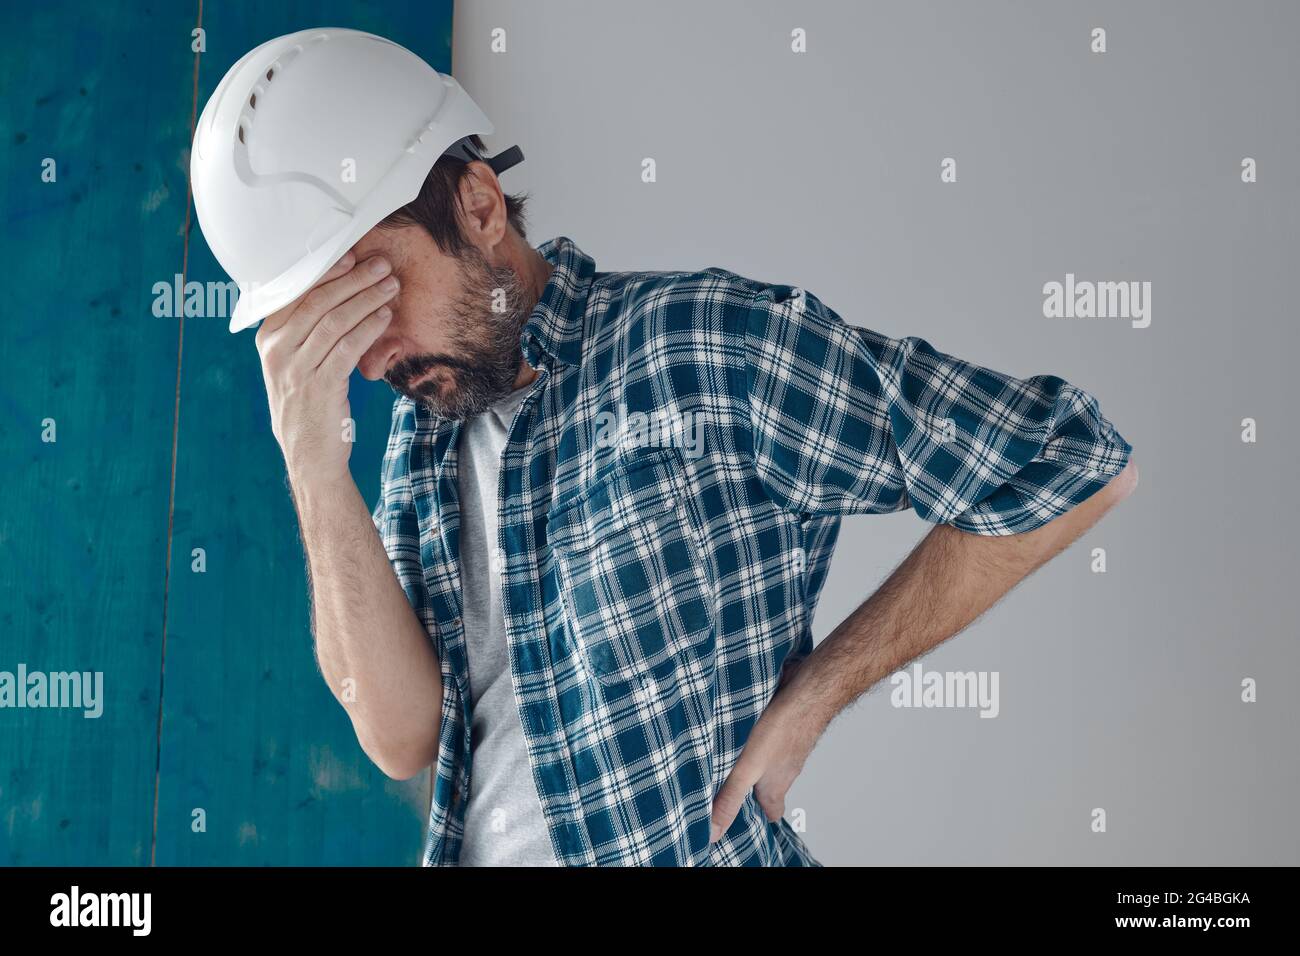 Tired and worried construction industry engineer feeling exhausted and disappointed Stock Photo